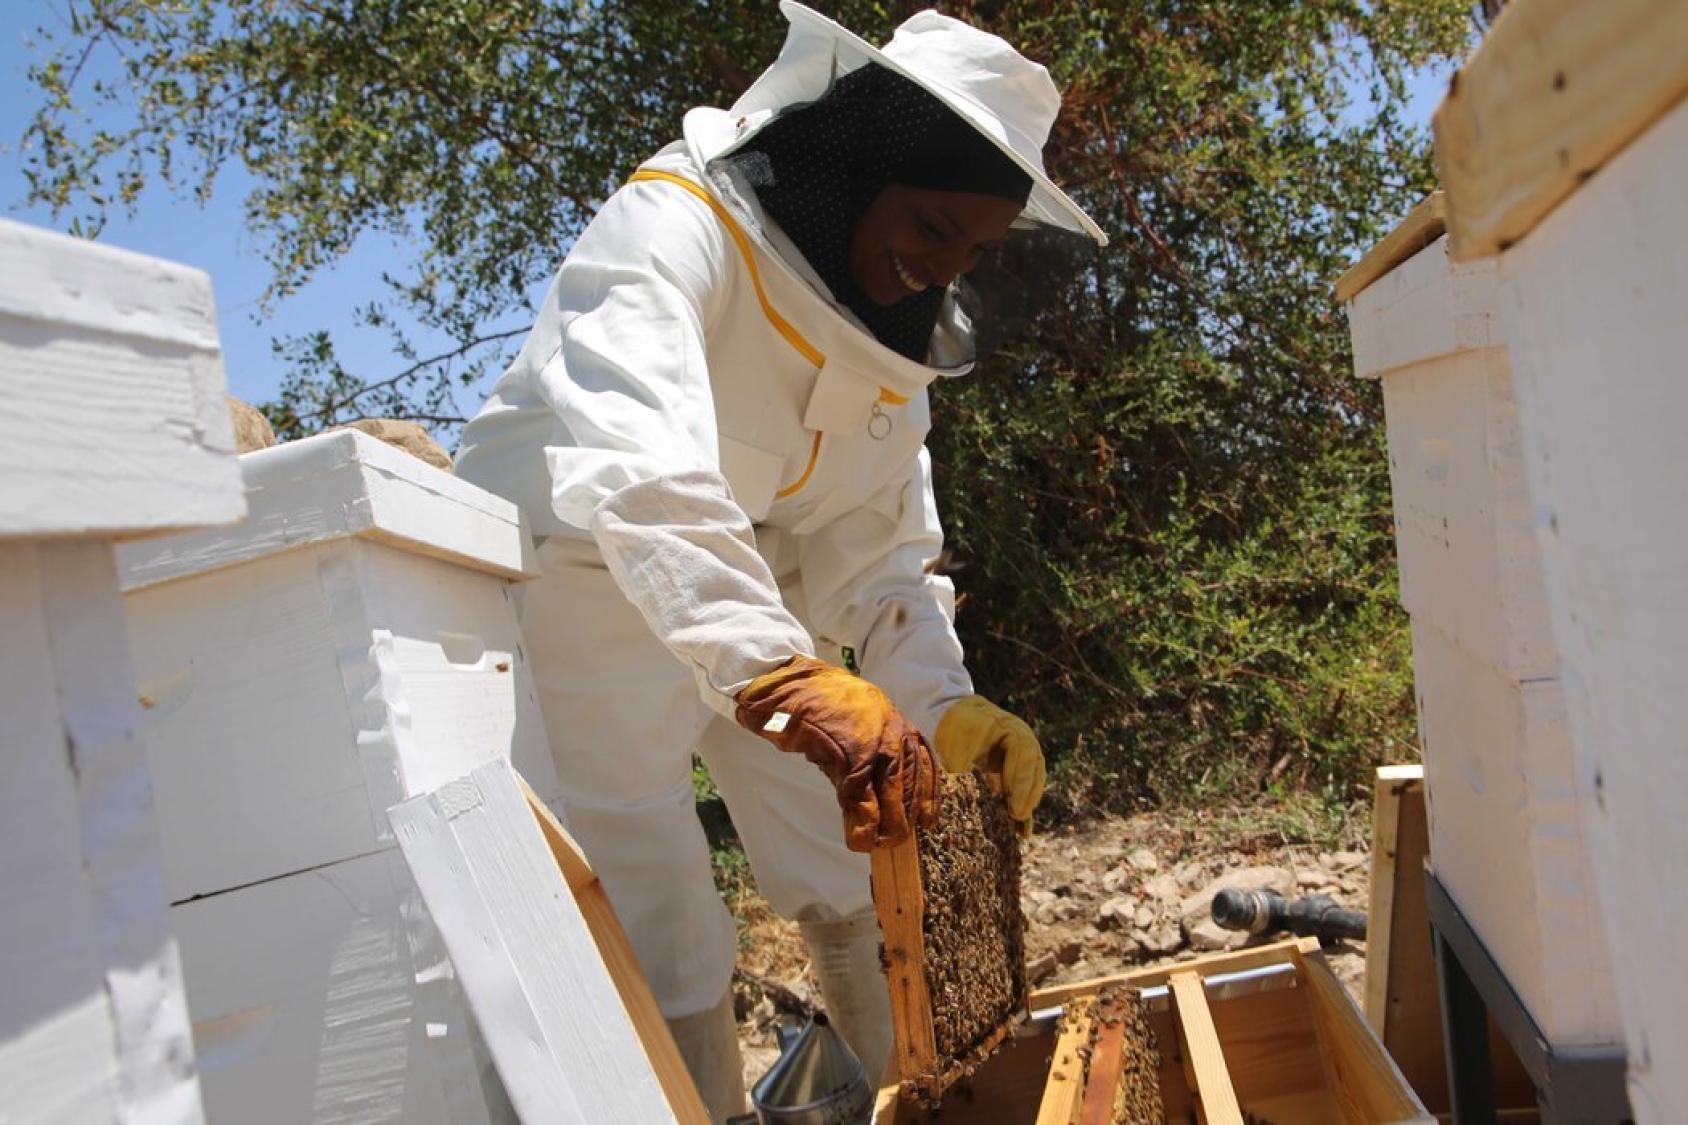 A beekeeper inspects the beehives.